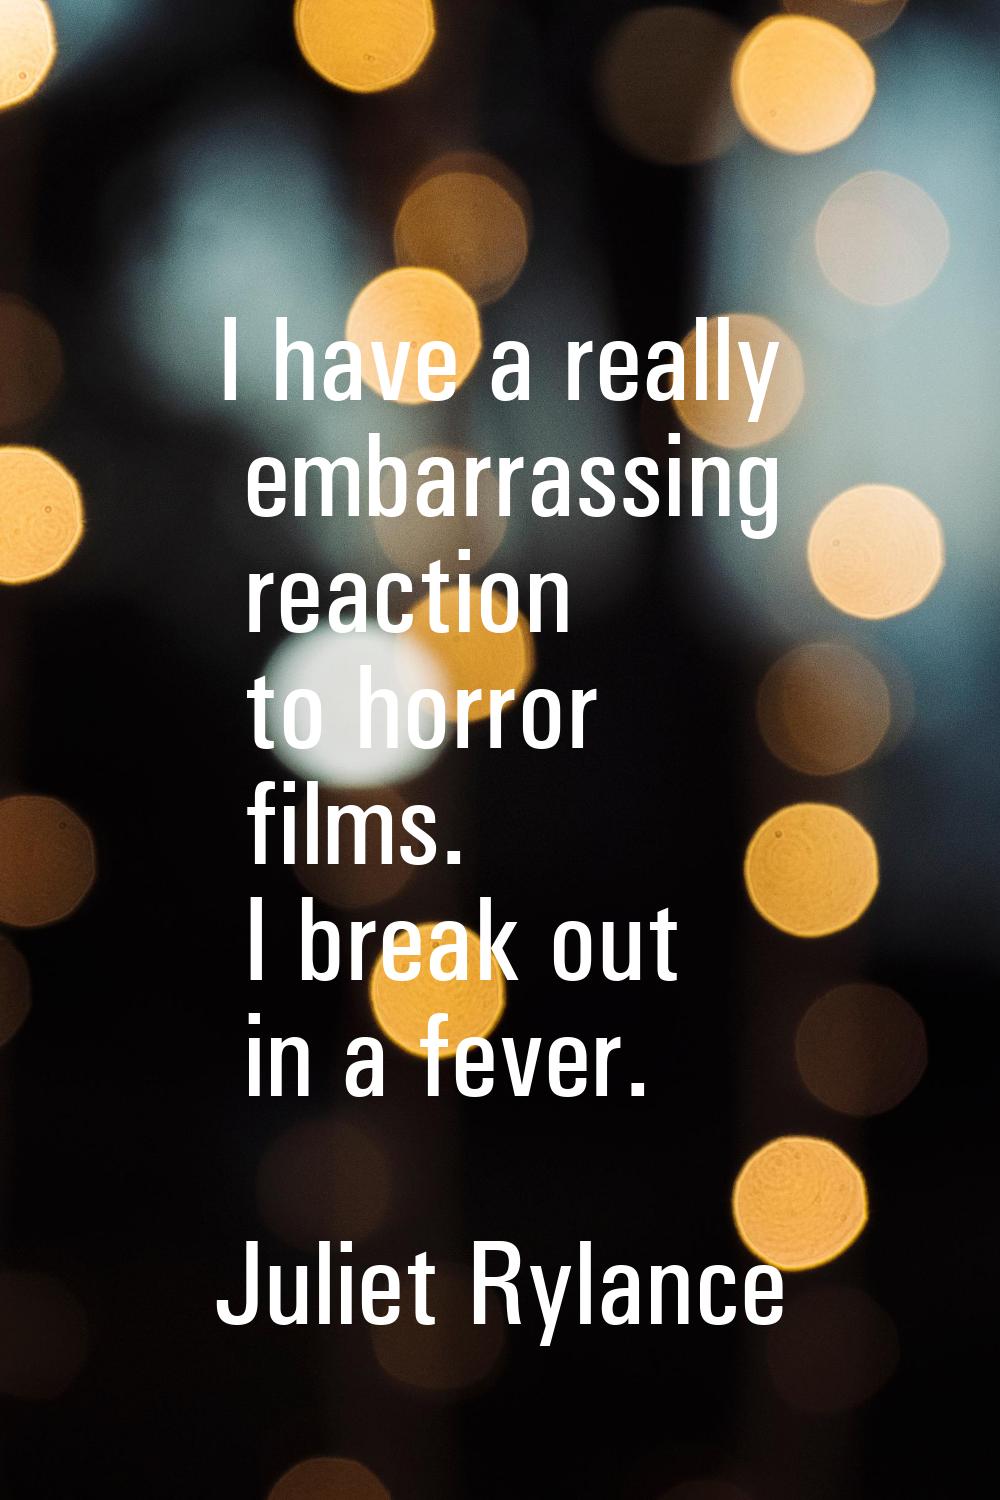 I have a really embarrassing reaction to horror films. I break out in a fever.